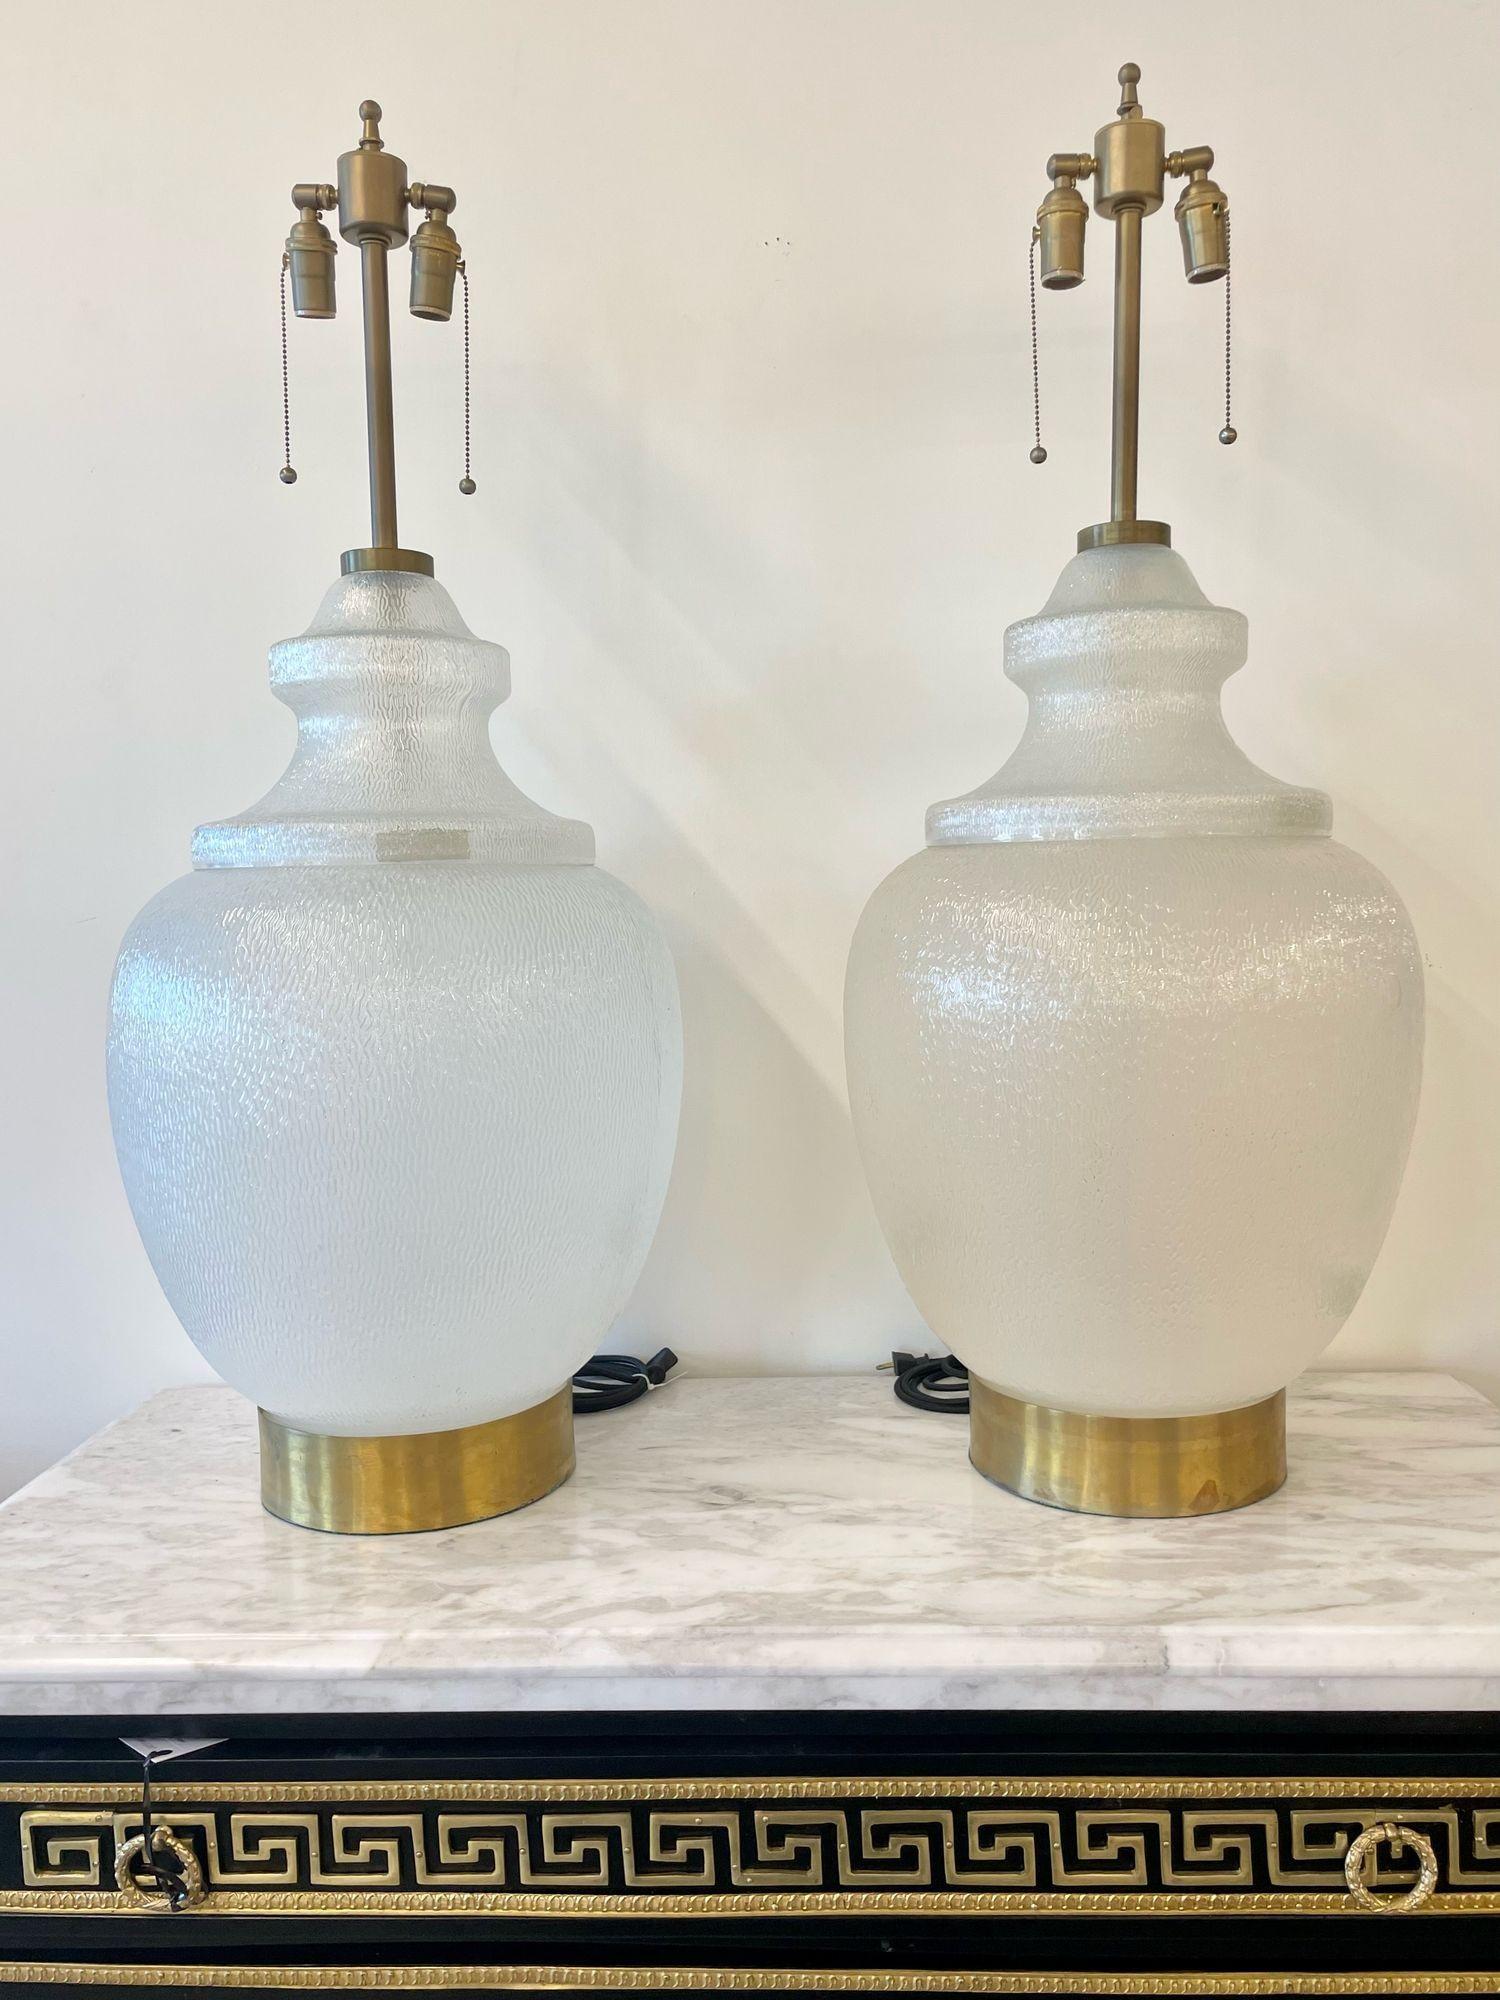 Pair Large White Mid-Century Modern Table Lamps, Textured Art Glass, Brass 1960s
 
Each having an artist branded stamp on the glass. The pair sold without shades. 
 
United States, 1960s
 
41.5 H x 16 D.
2 x e26 standard sockets
Shades not